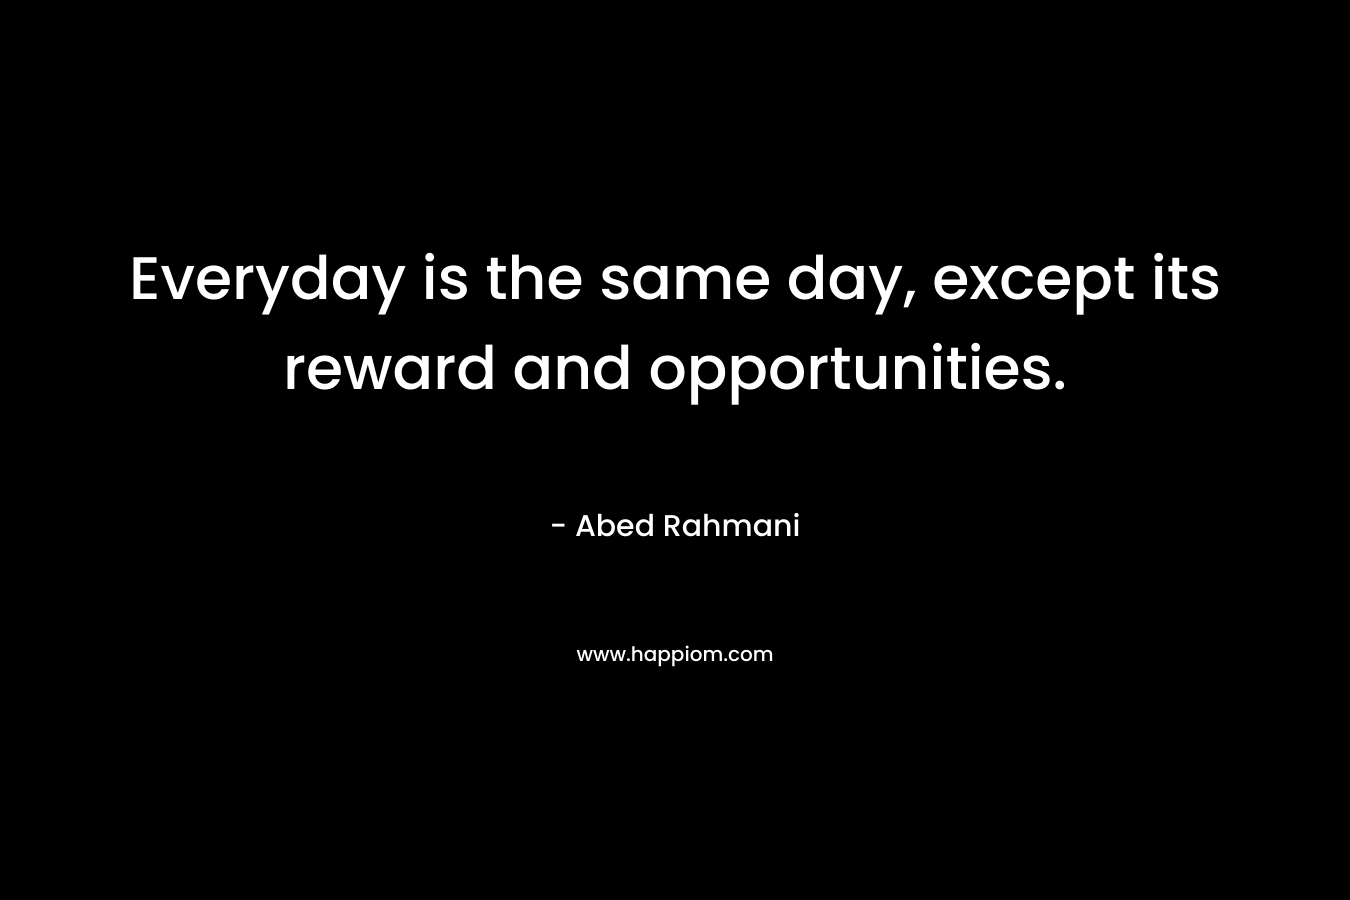 Everyday is the same day, except its reward and opportunities. – Abed Rahmani